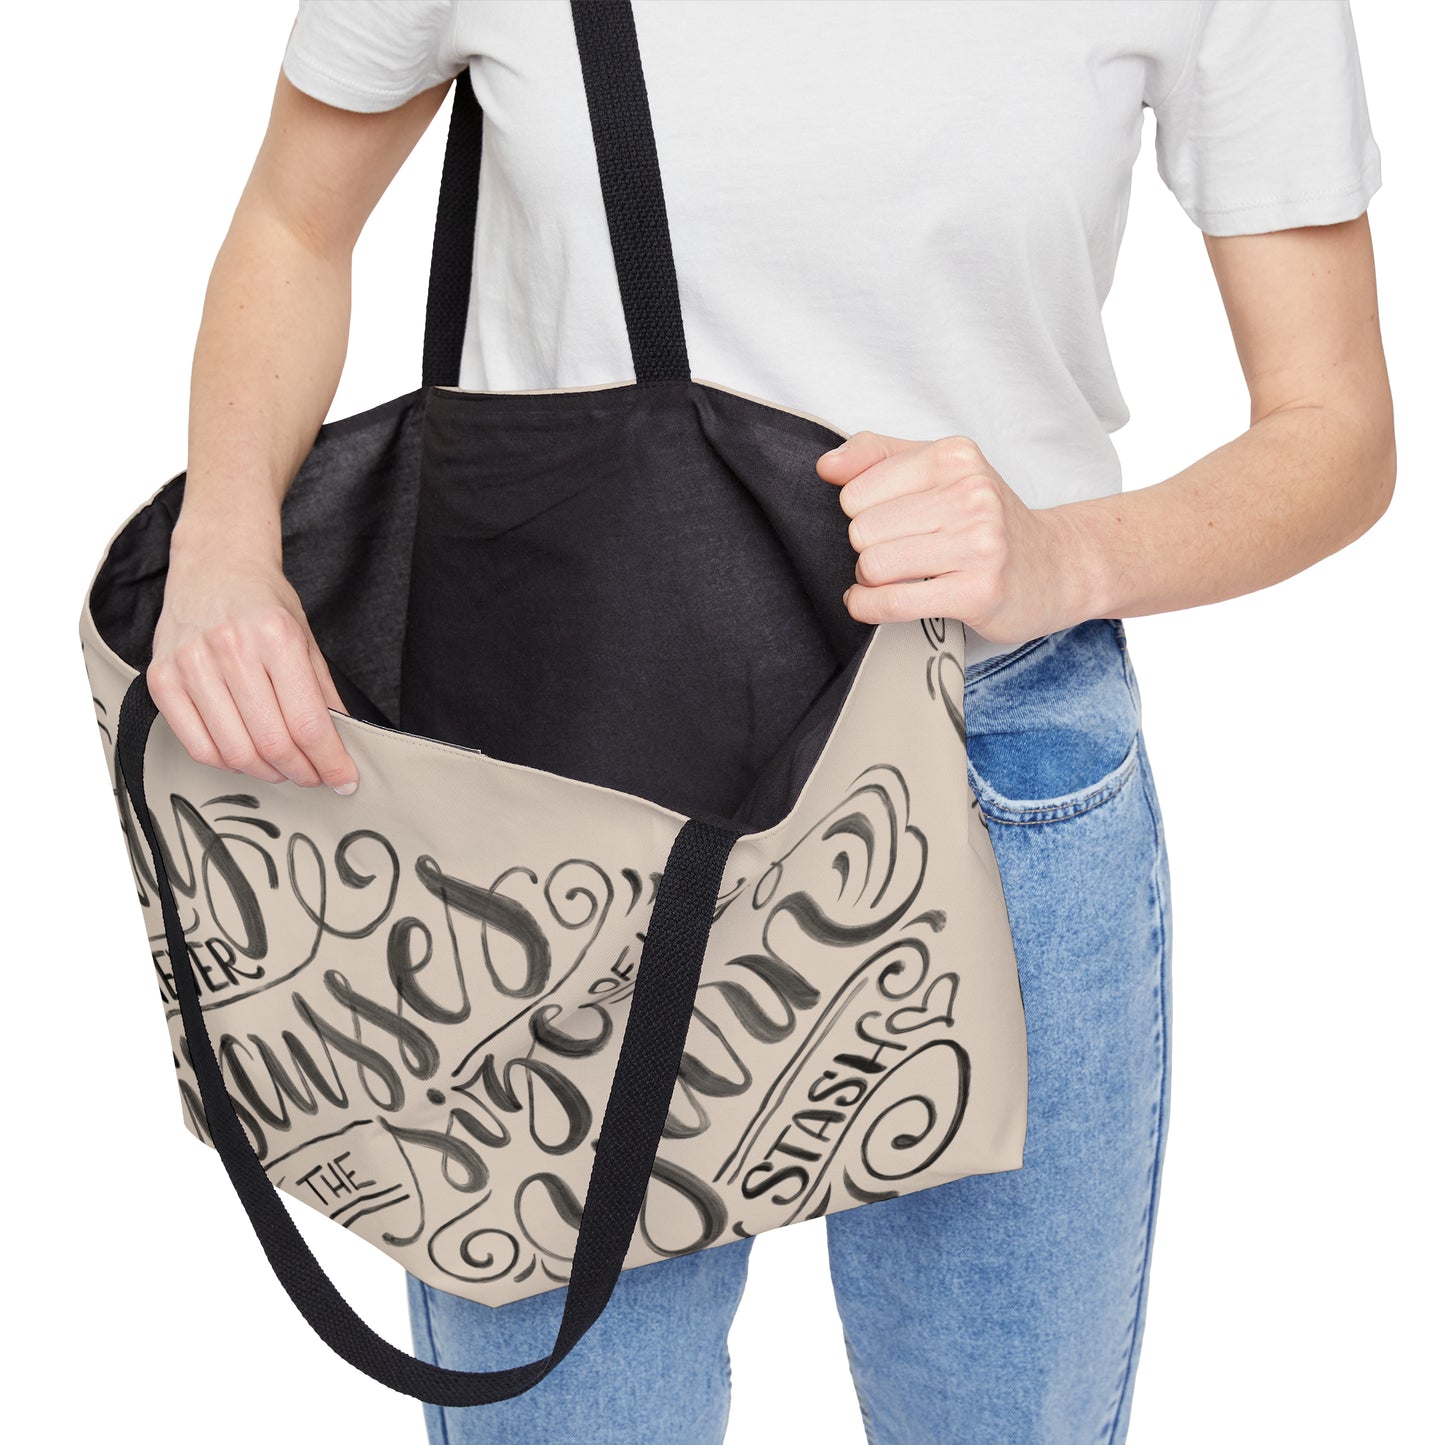 A lady never discusses the size of her yarn stash - Tan Weekender Tote Bag - howjoyfulshop